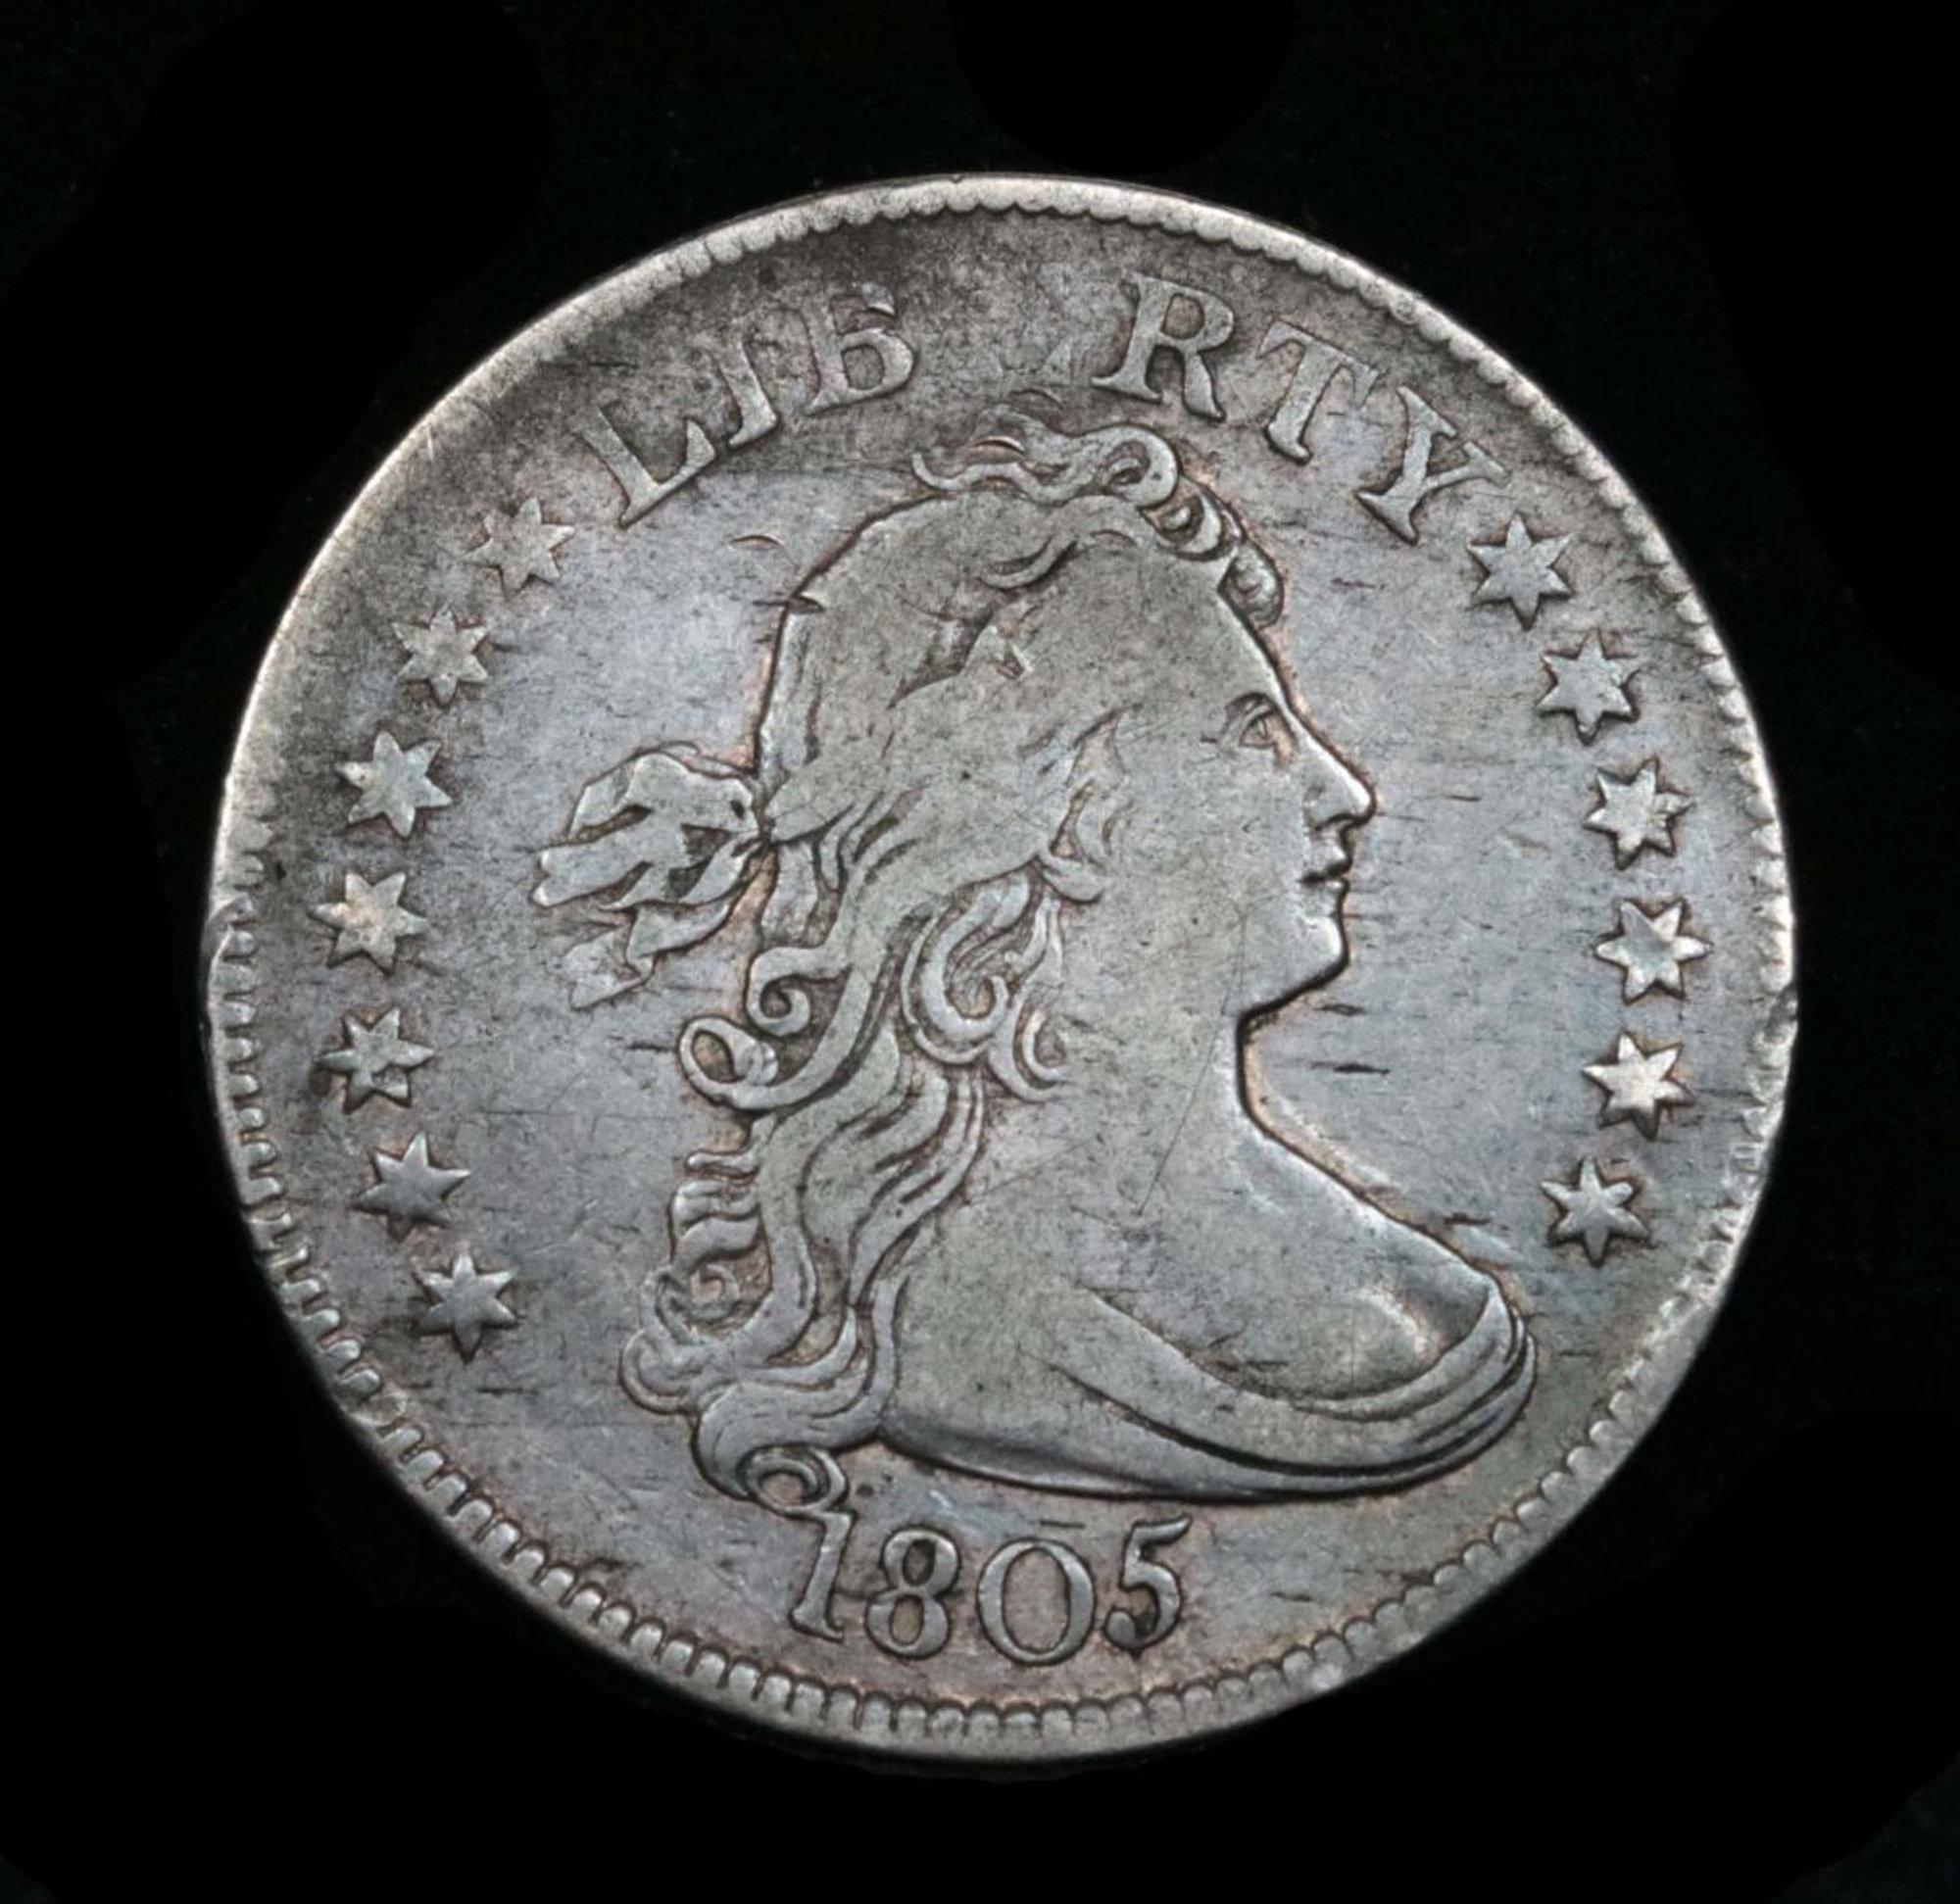 ***Auction Highlight*** 1805 Draped Bust Quarter 25c Graded vf++ by USCG (fc)